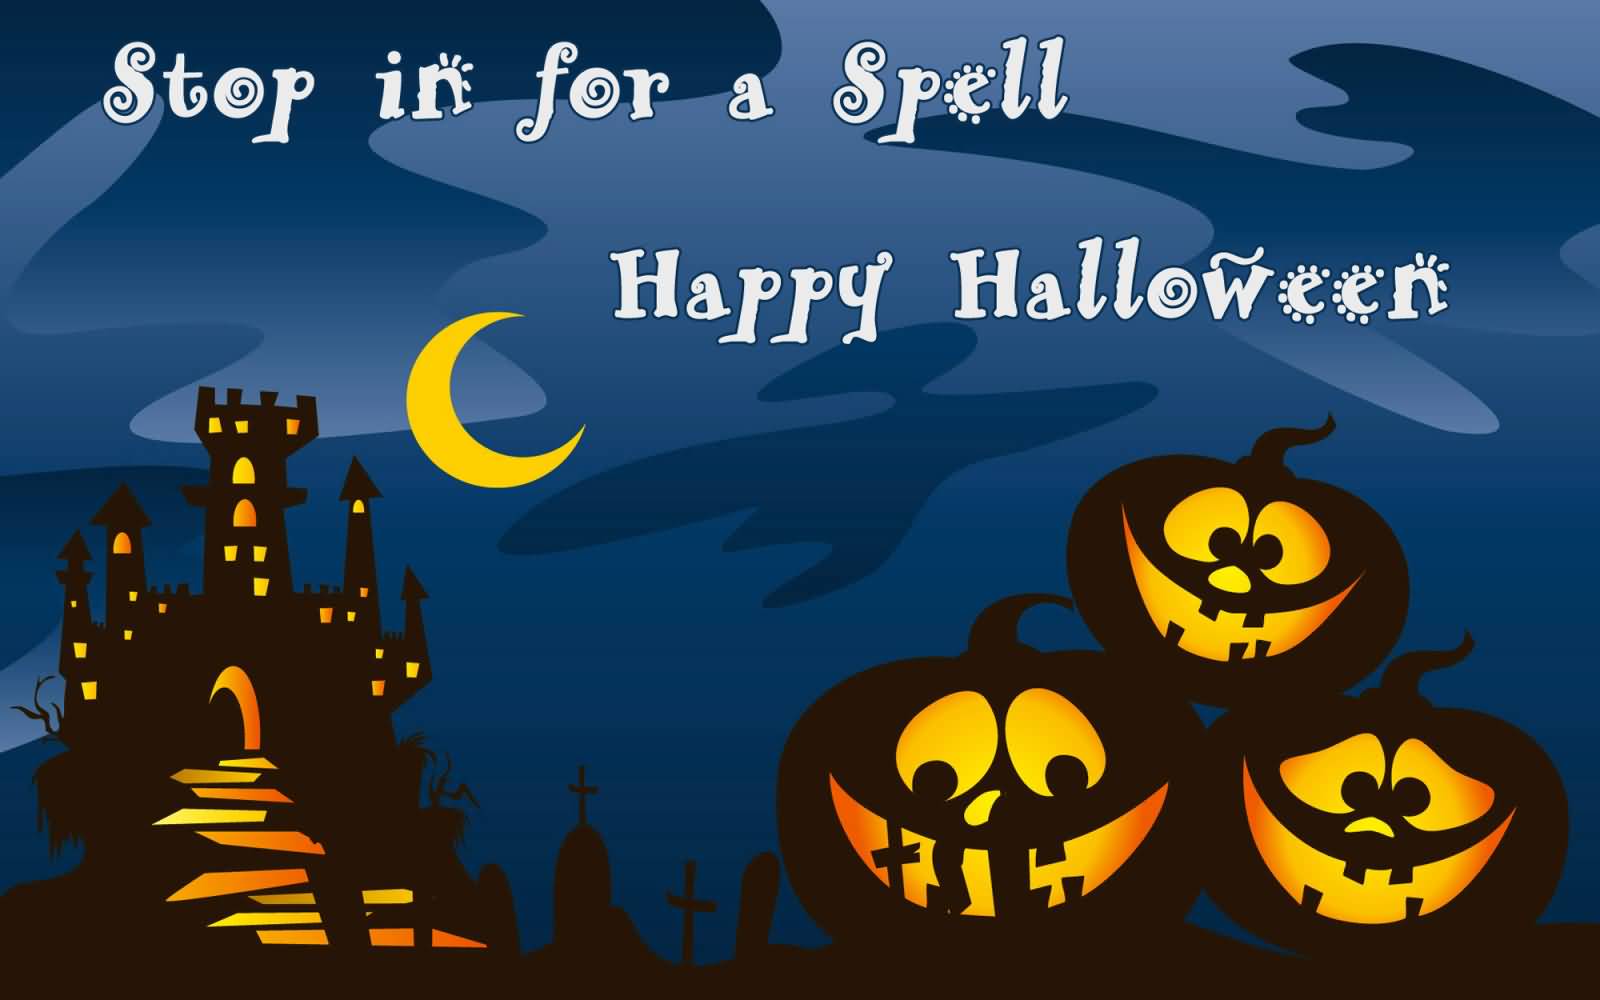 Stop In For A Spell Happy Halloween Greeting Card Image